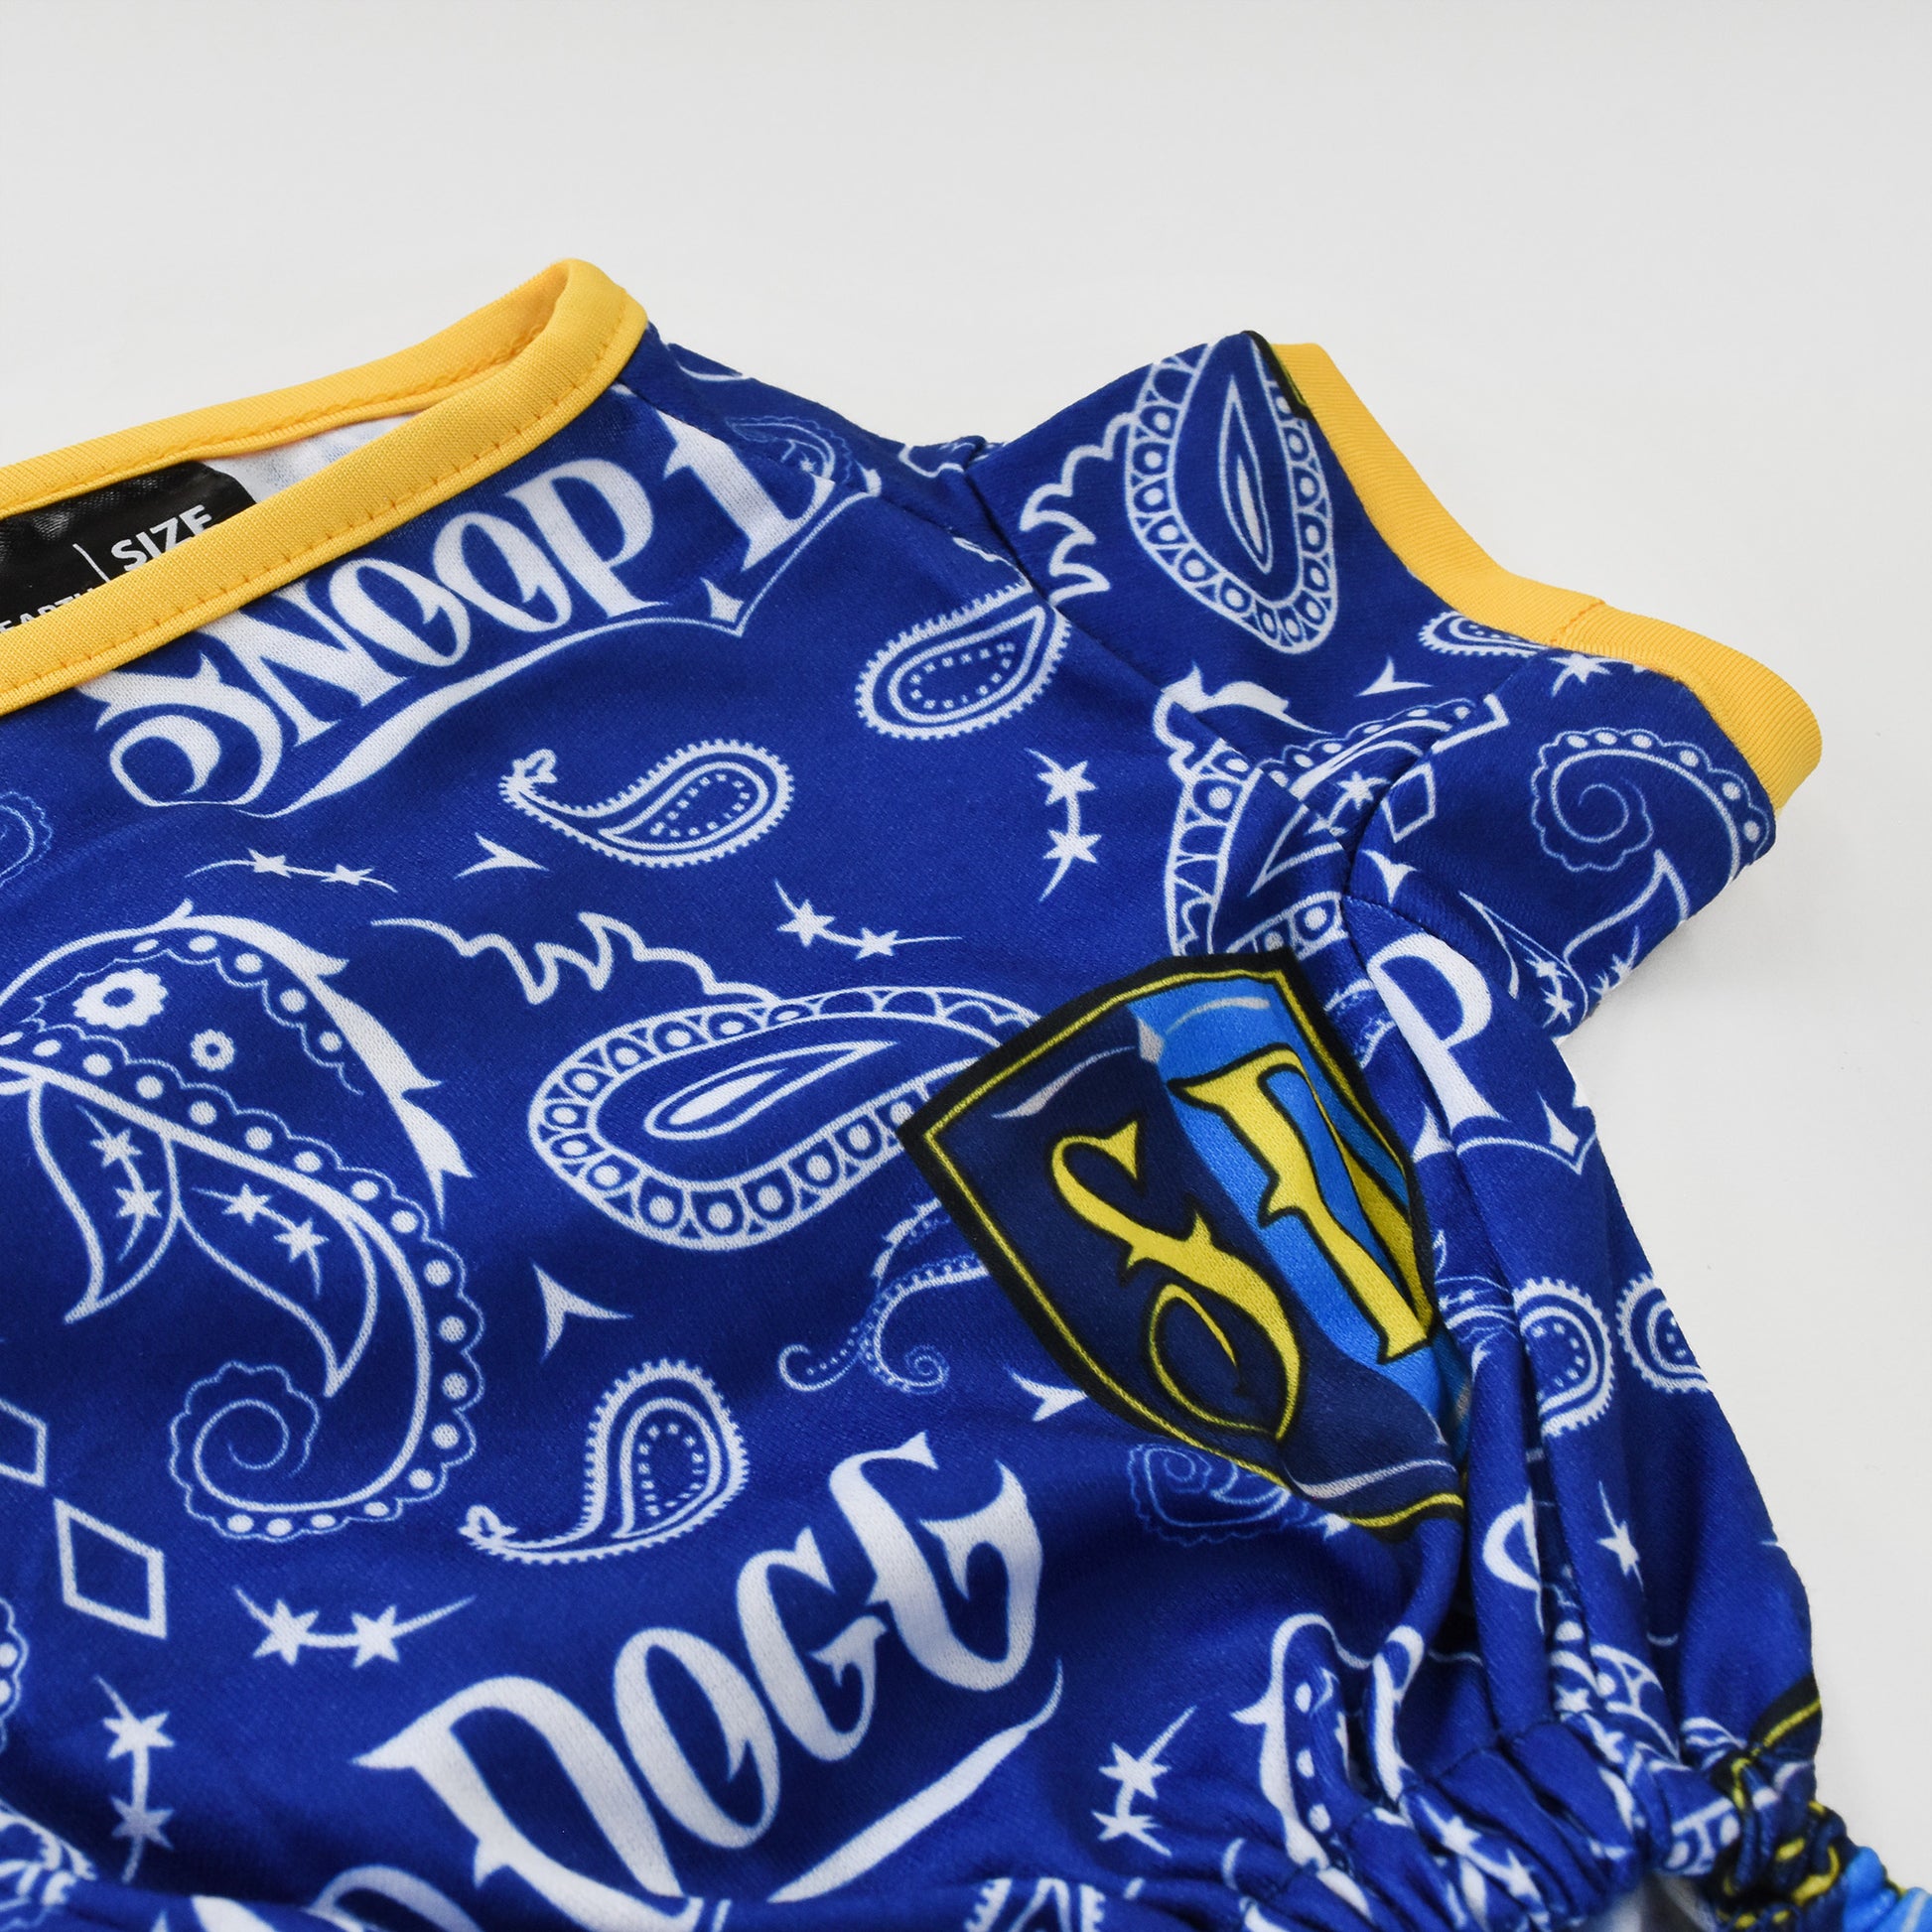 A close up of the Halftime Deluxe Pet PJs sublimated design and gold trim.